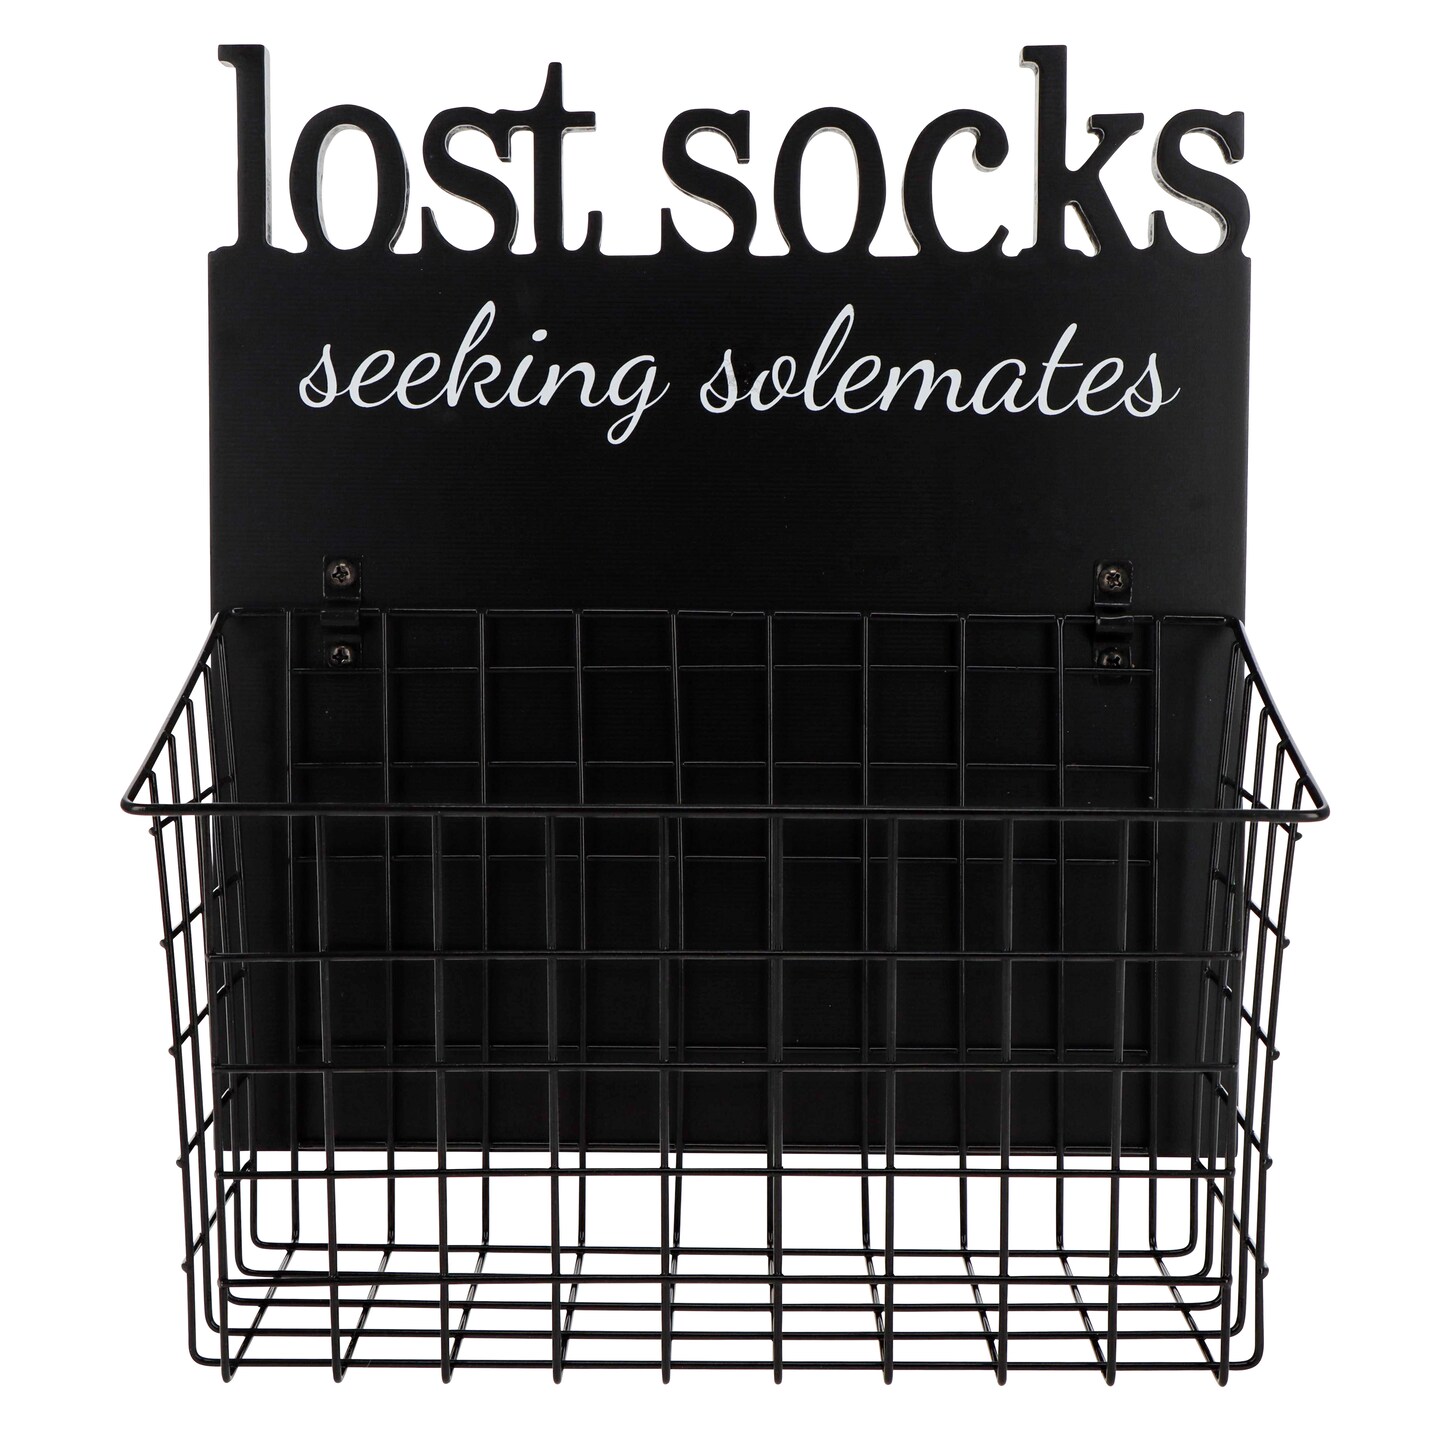 Creekview Home Emporium Seeking Soulmate Lost Socks Basket for Laundry Room Sign